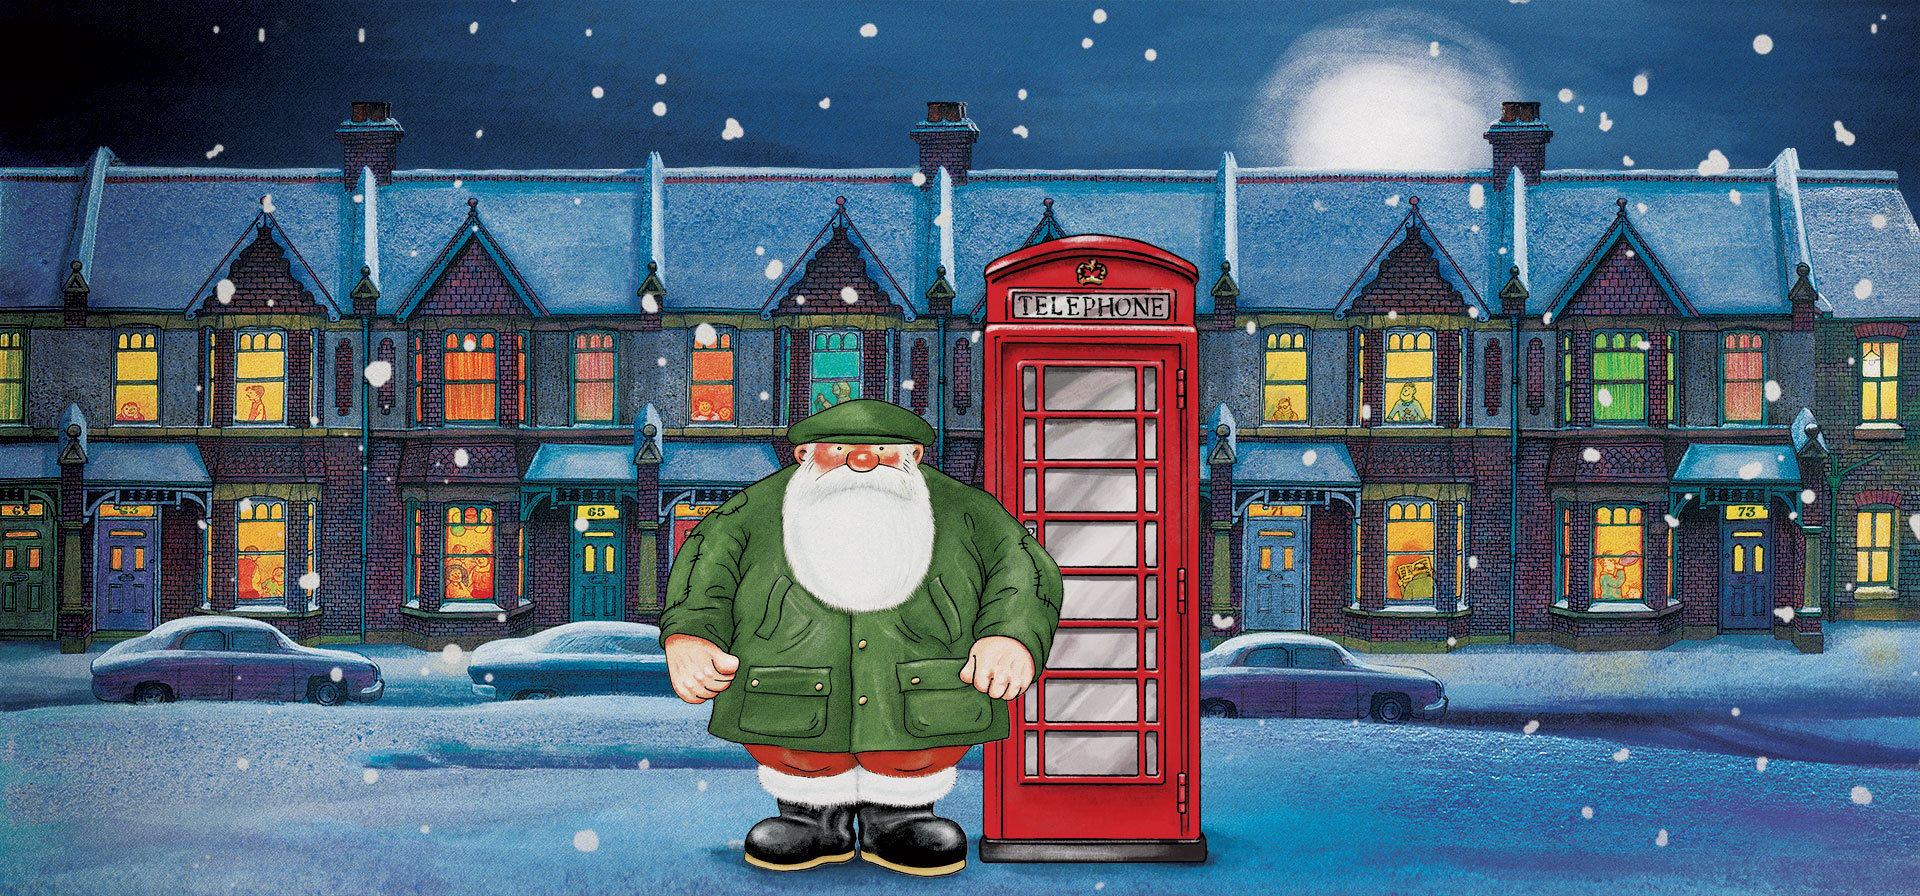 (Barbour) father christmas with red telephone box